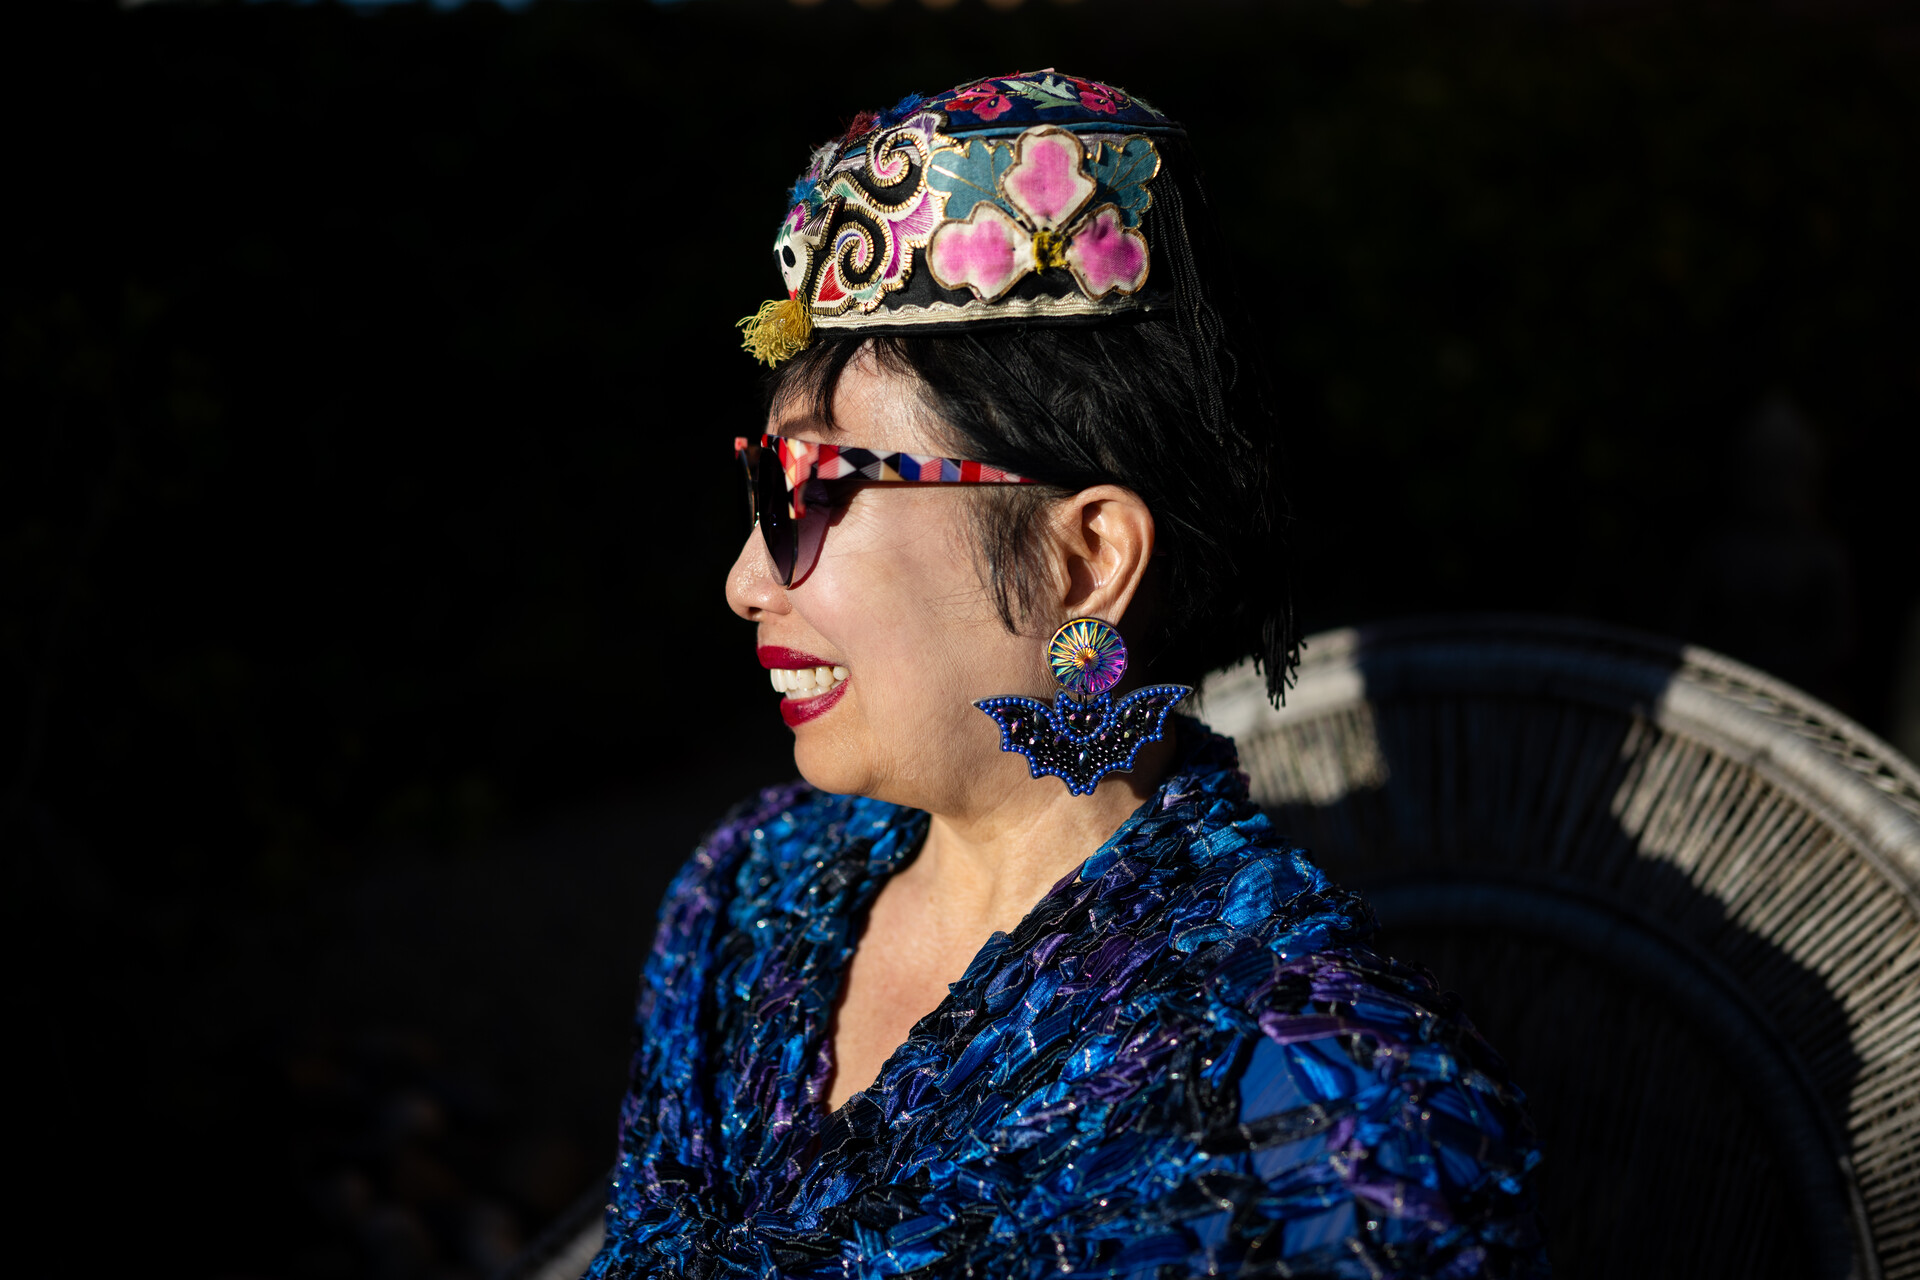 Asian woman in sunglasses, embroidered hat and bat-shaped earrings smiles in profile